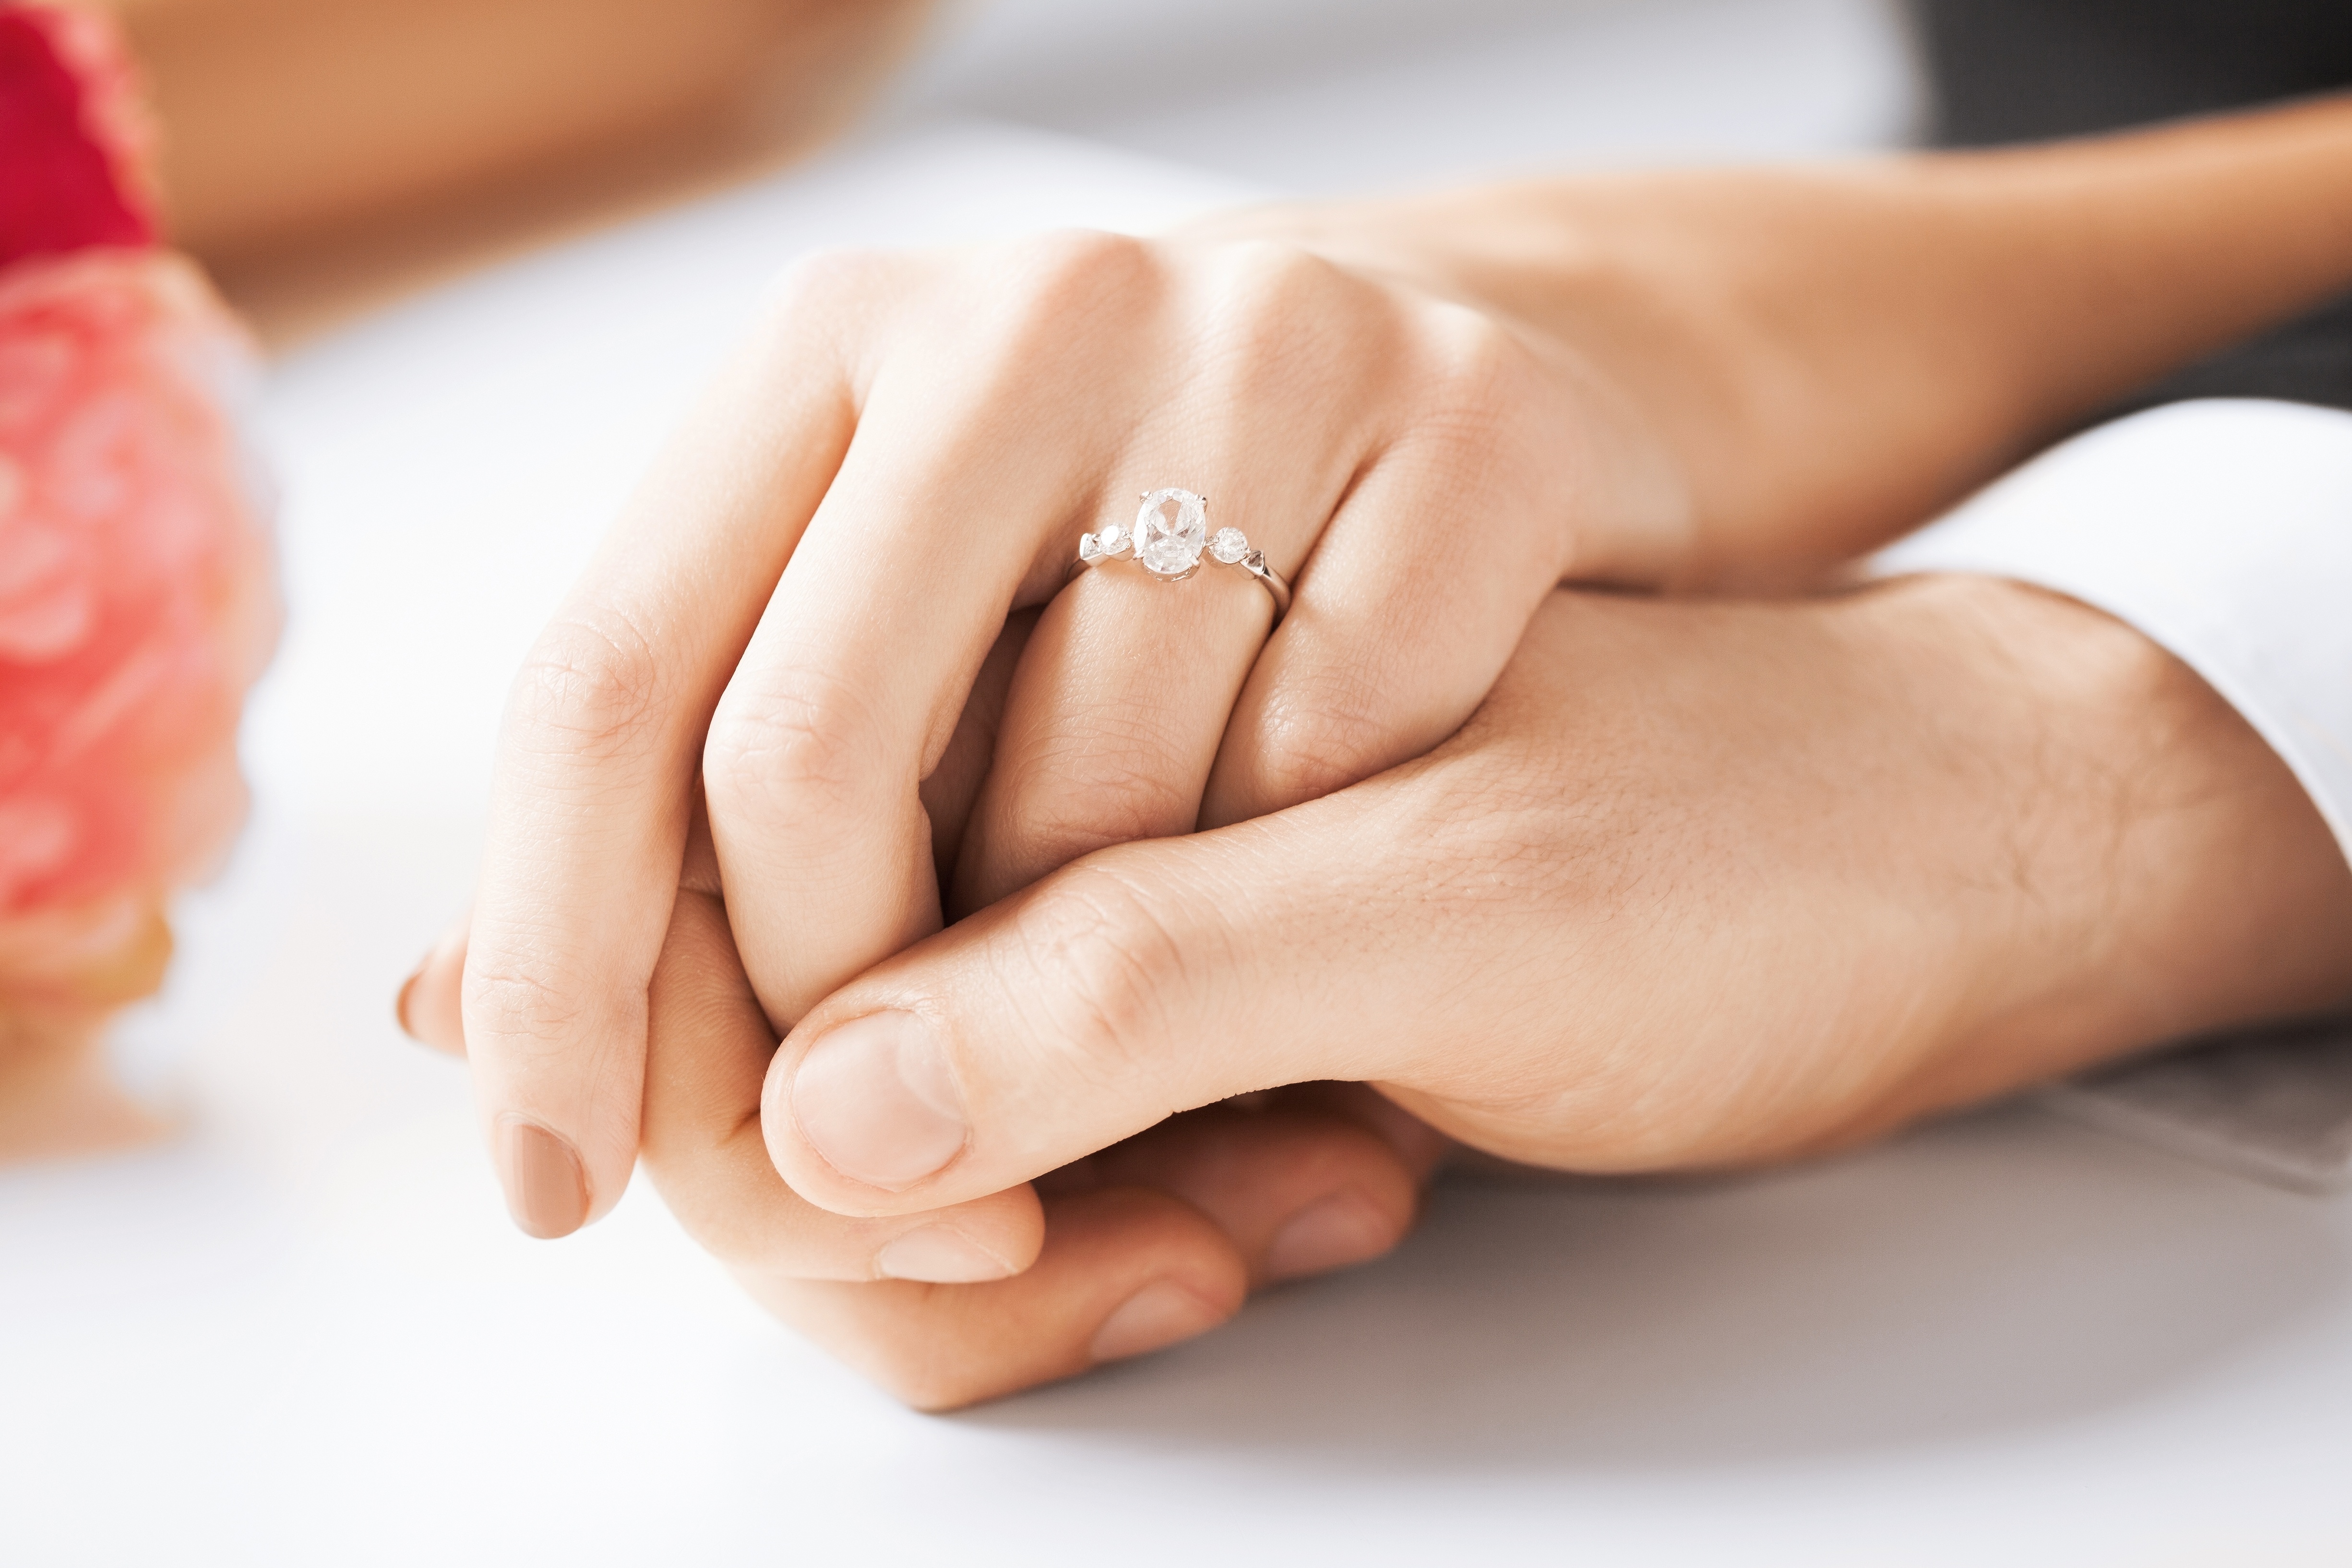 Who Gets the Engagement Ring if the Couple Splits Before Marriage?